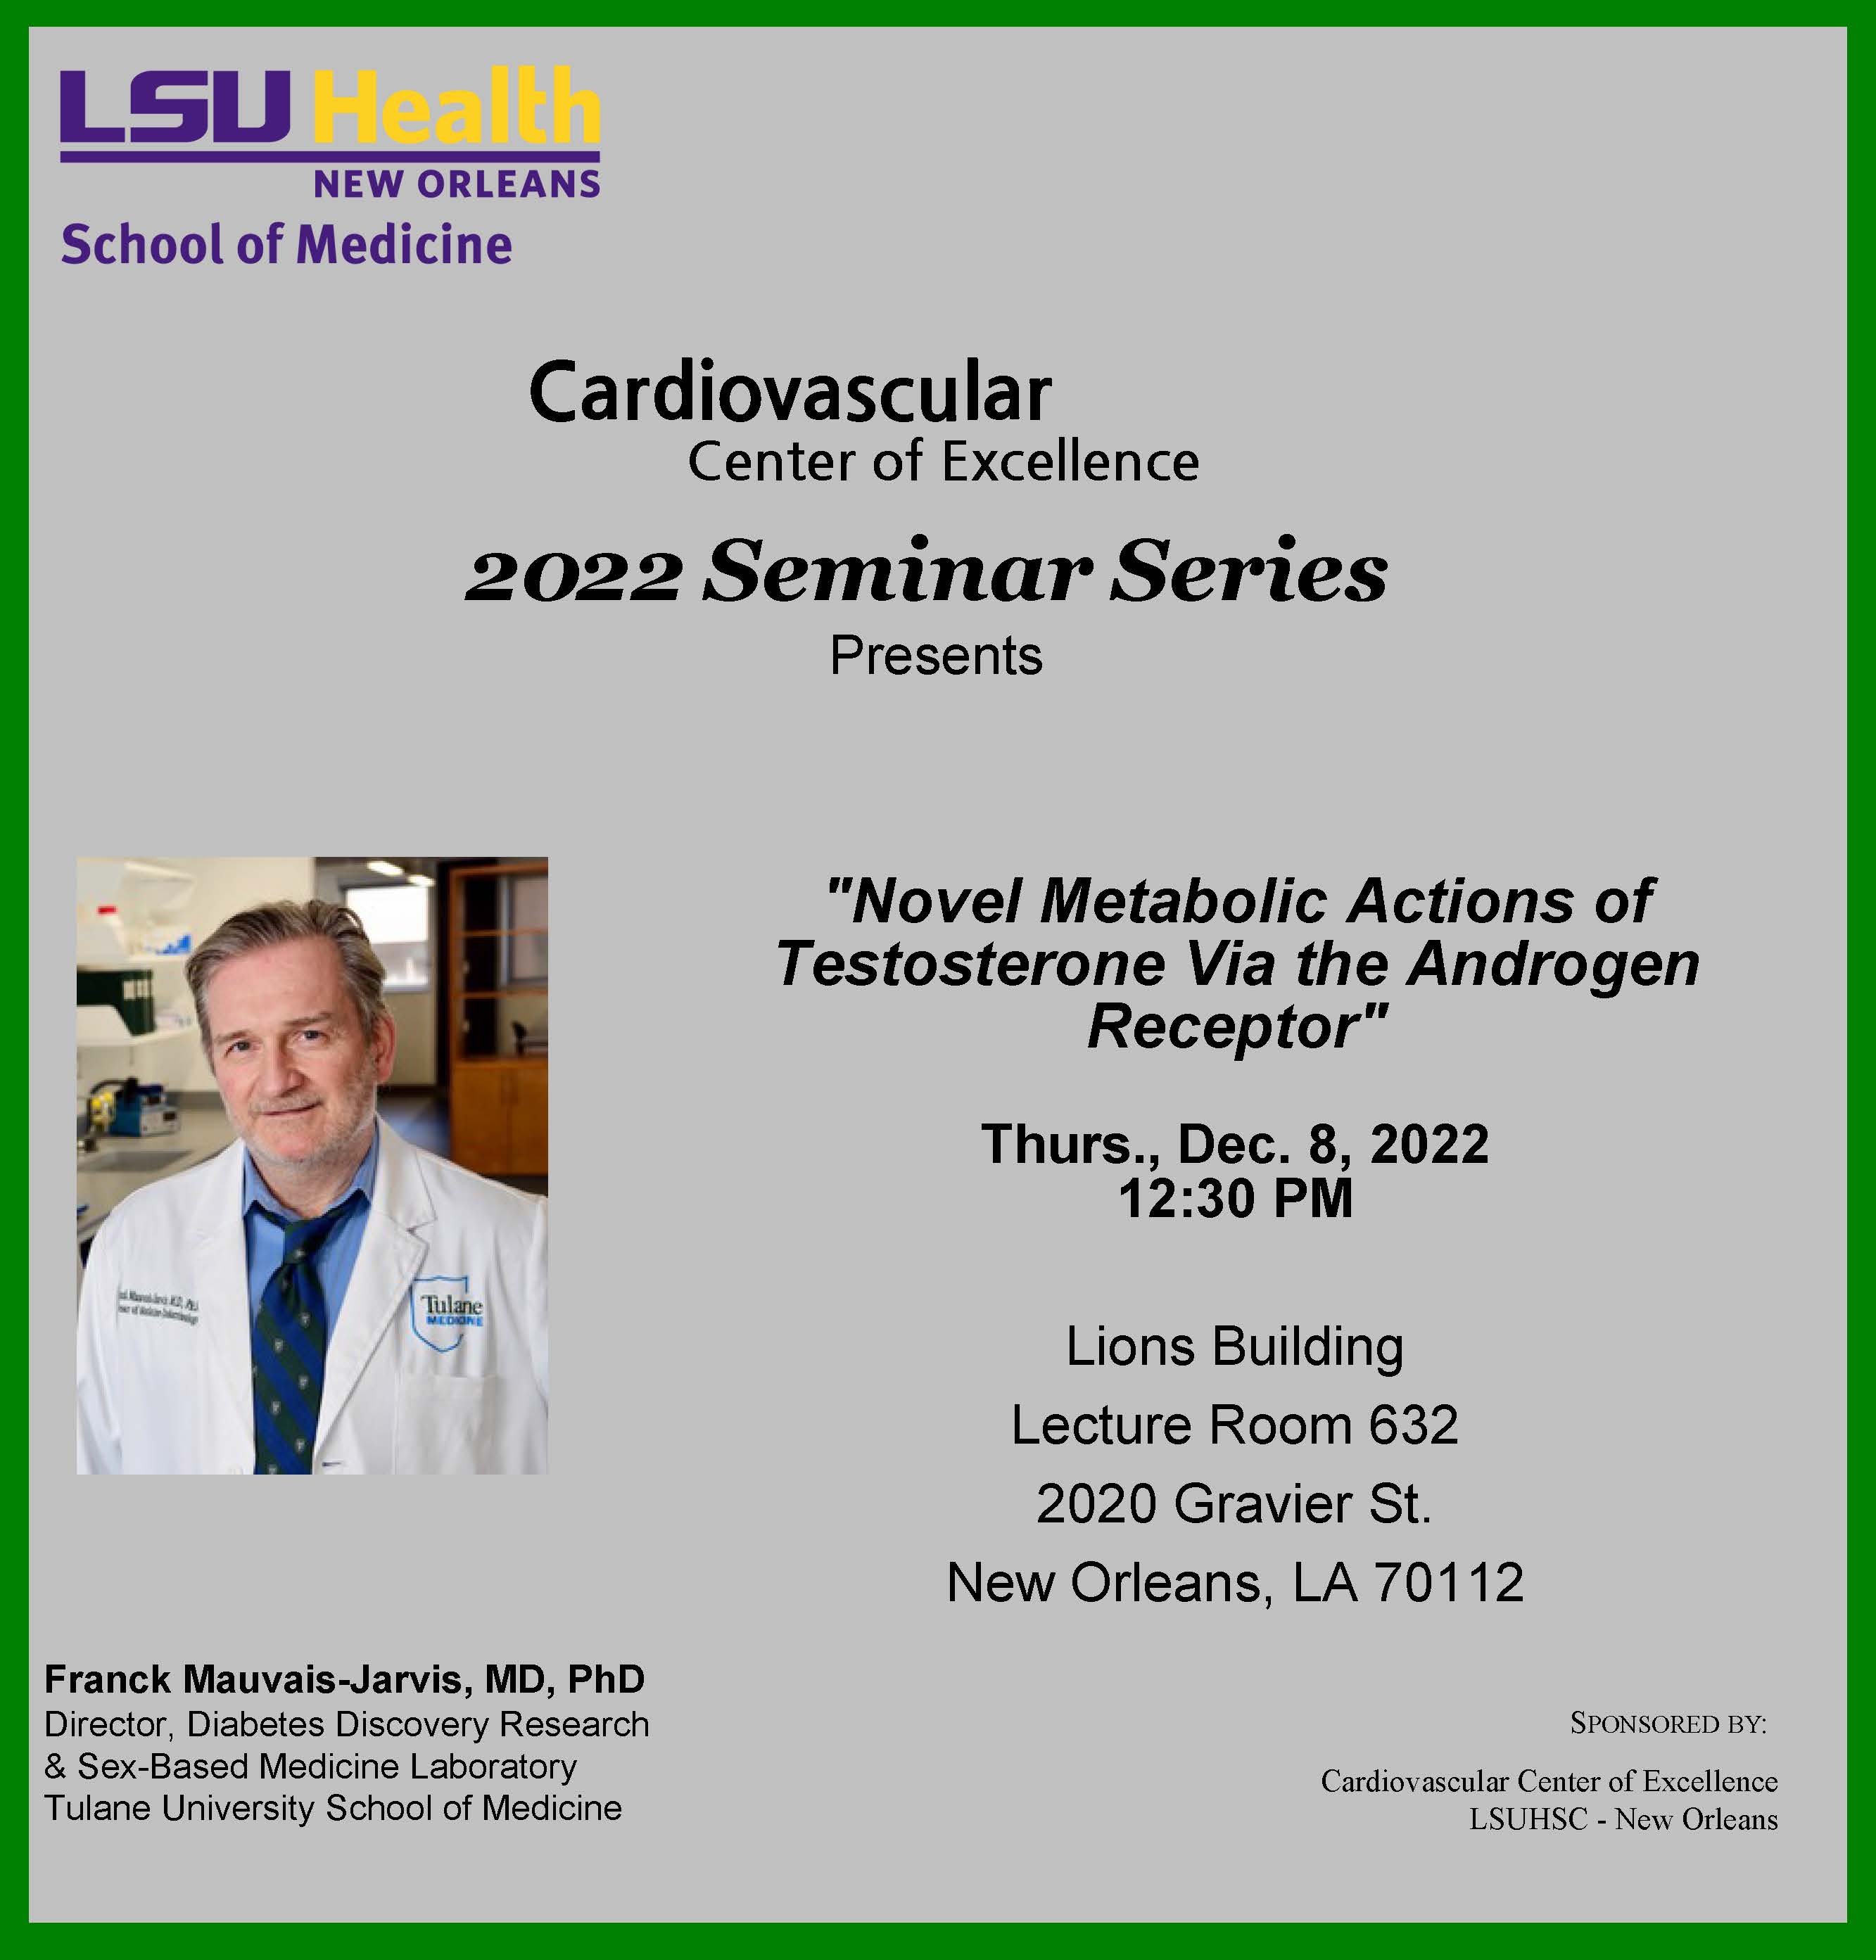 Event Title: Cardiovascular Center Seminar Series Dr. Franck Mauvais-Jarvis, Event Date: December 08, Starting at 12:30 PM and ending at 01:30 PM in Building: Lions/LSU Clinics Building Room: 632